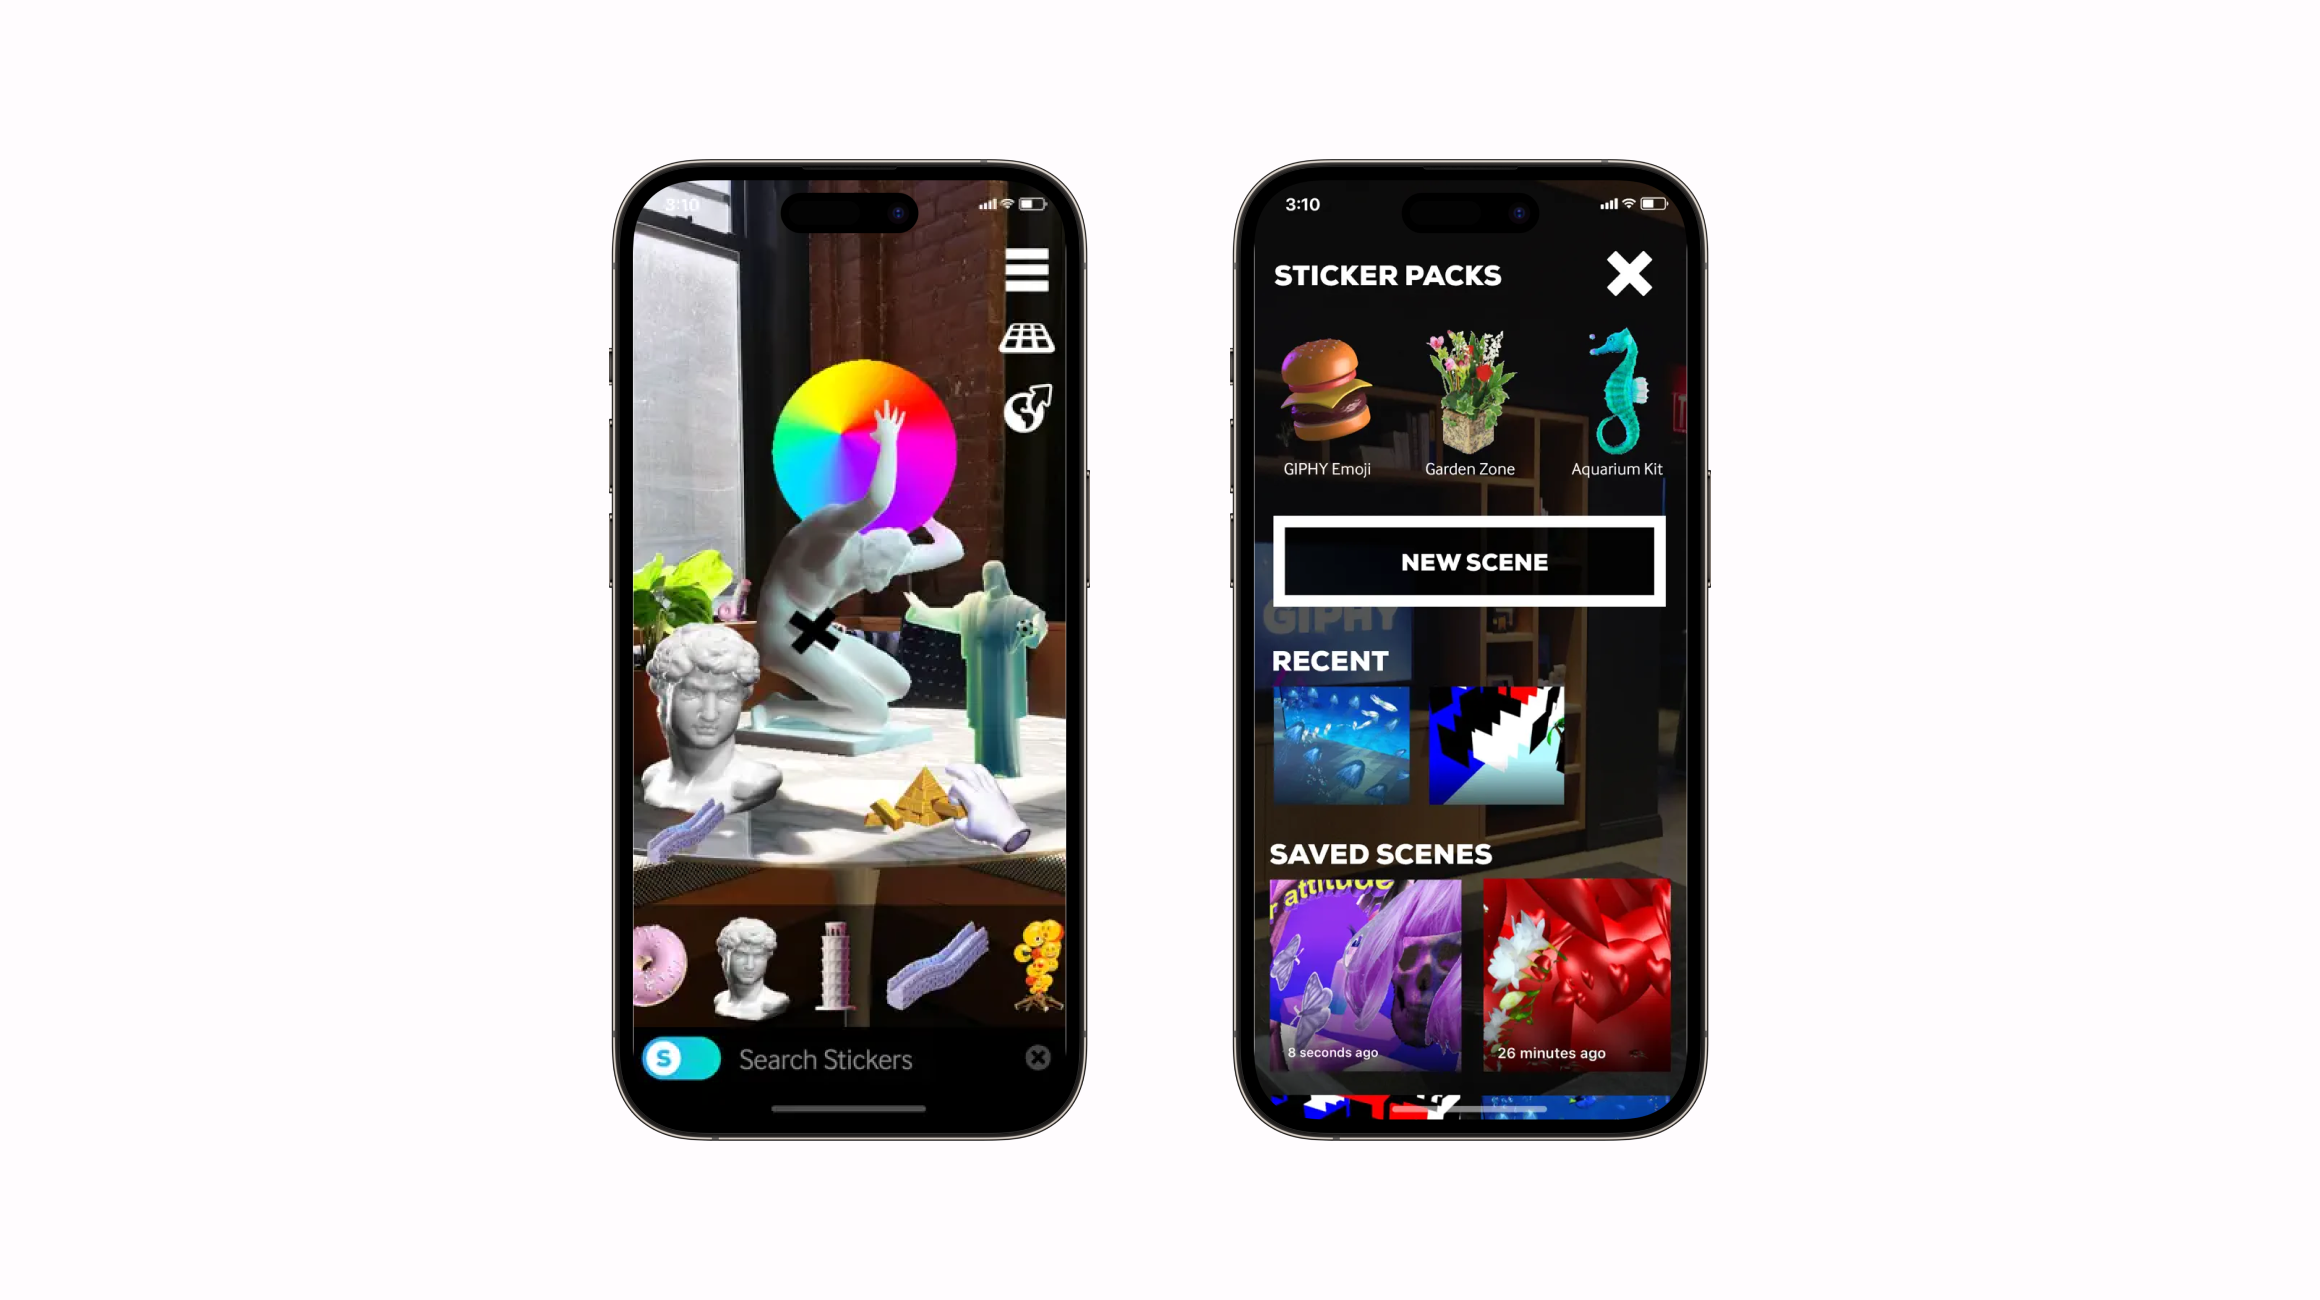 The Augmented Reality app adding the GIFs